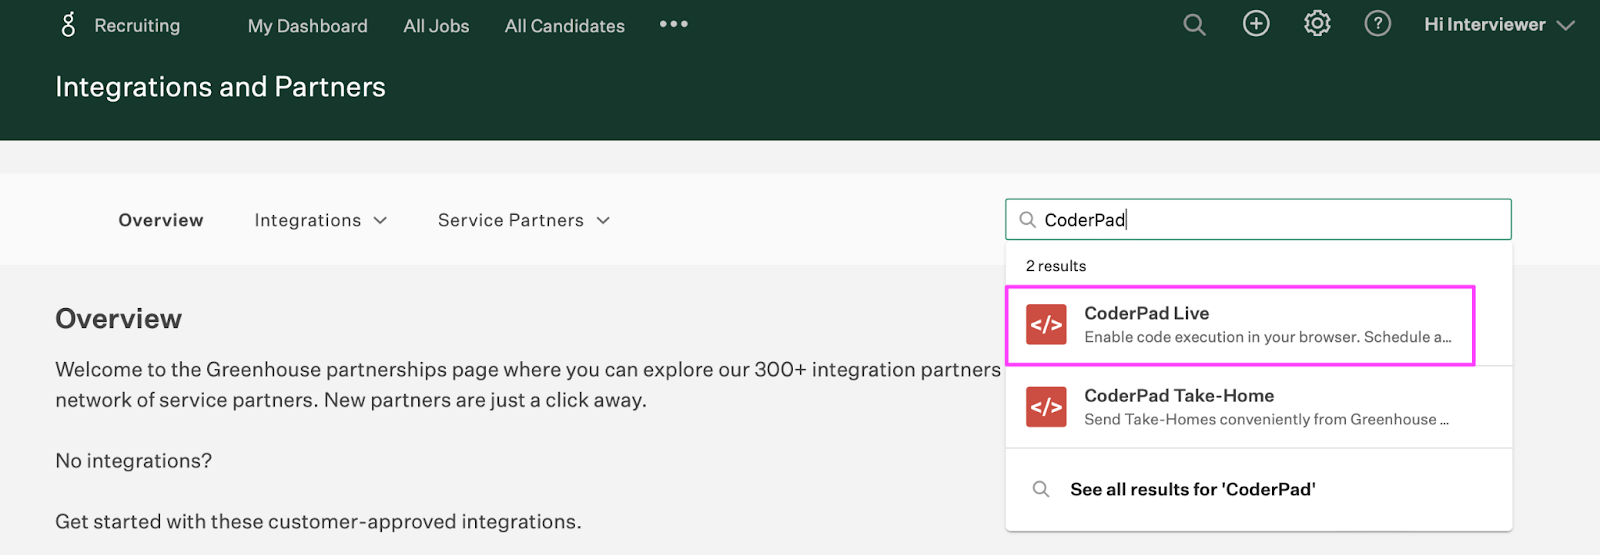 In the search bar at the top right of the "integrations and partners" page coderpad is entered and "coderpad live" is highlighted in the results.